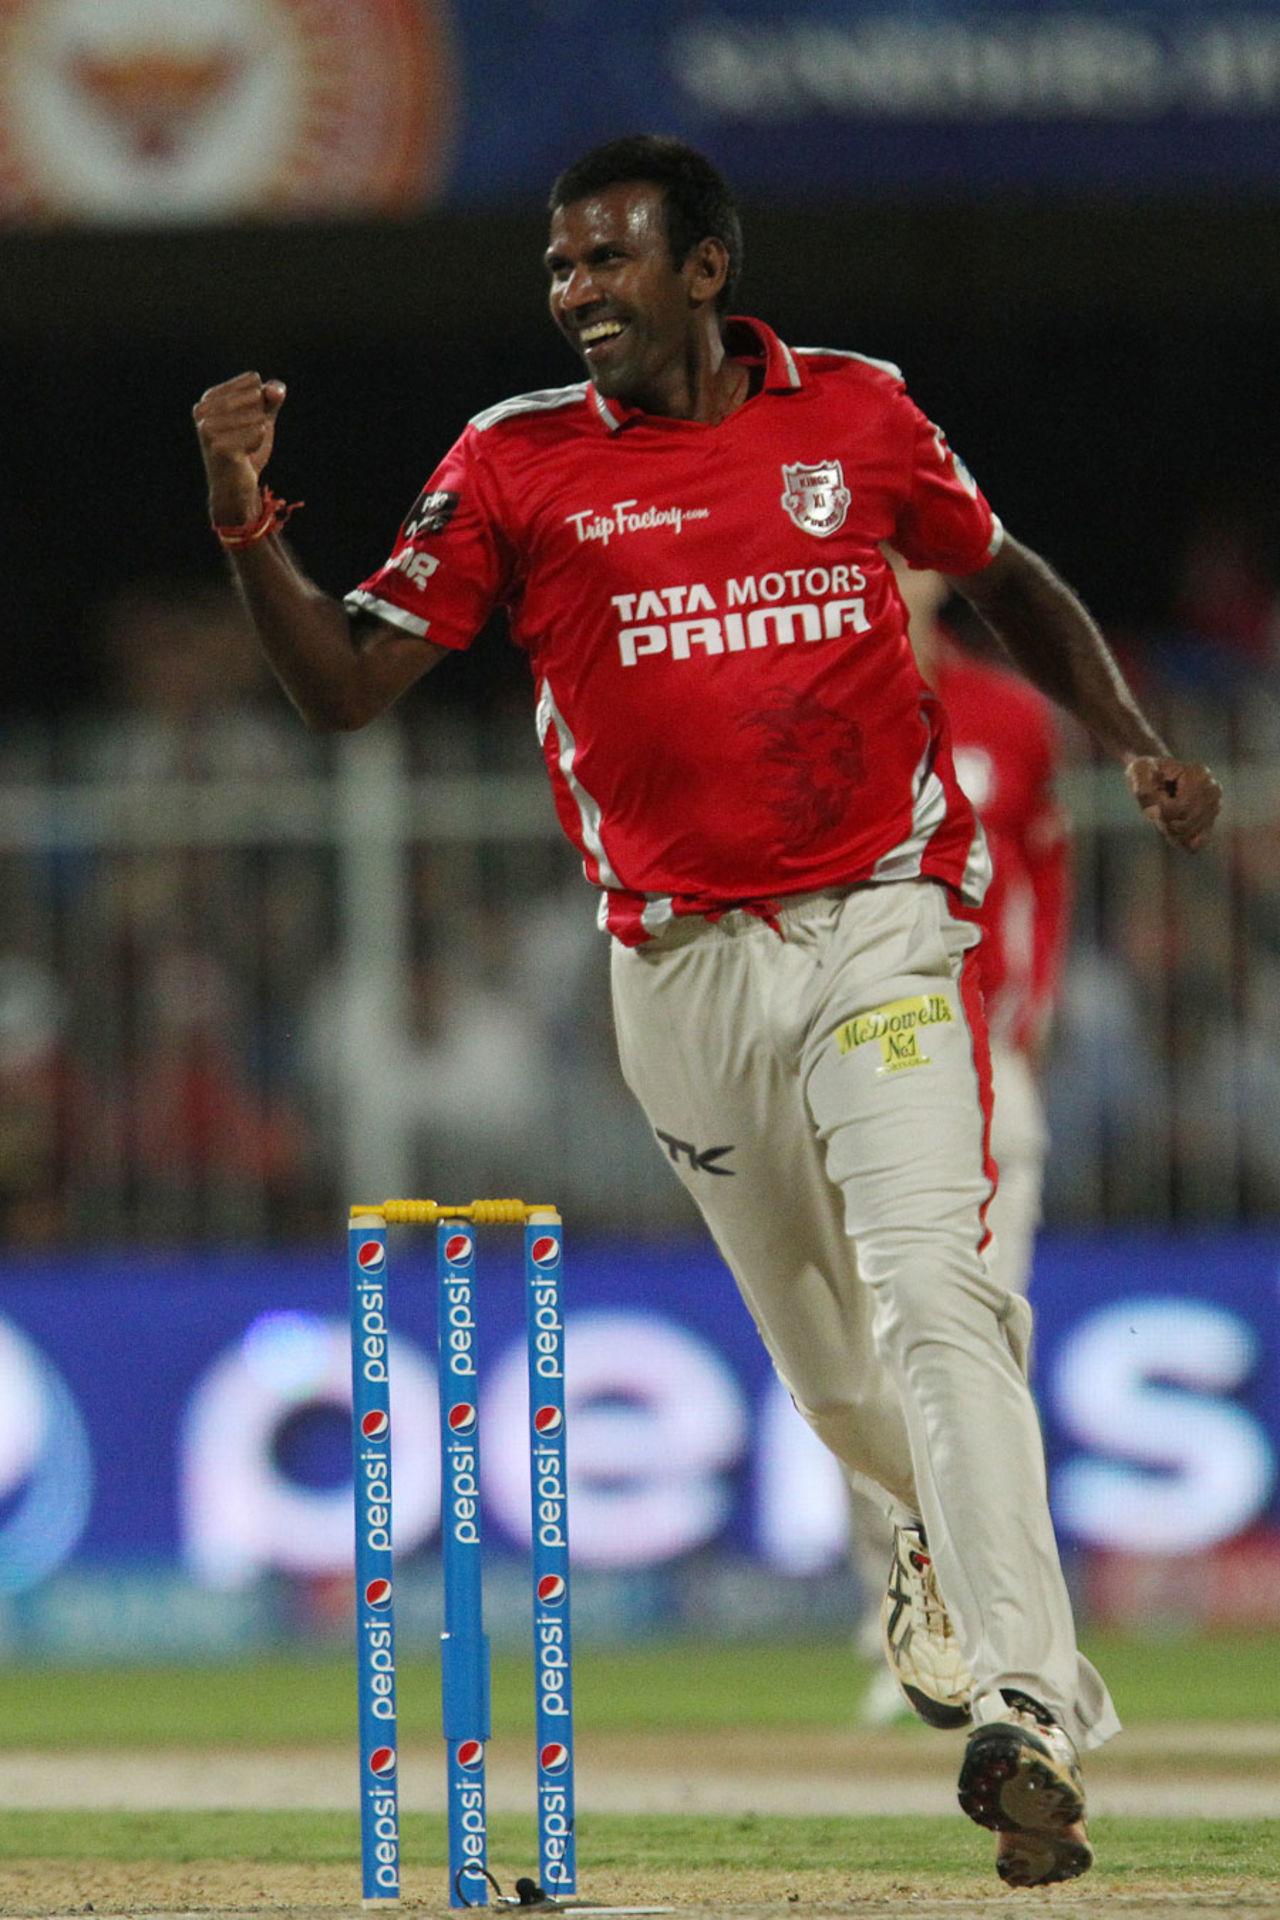 L Balaji delivered a double blow in the fifth over, Kings XI Punjab v Sunrisers Hyderabad, IPL 2014, Sharjah, April 22, 2014